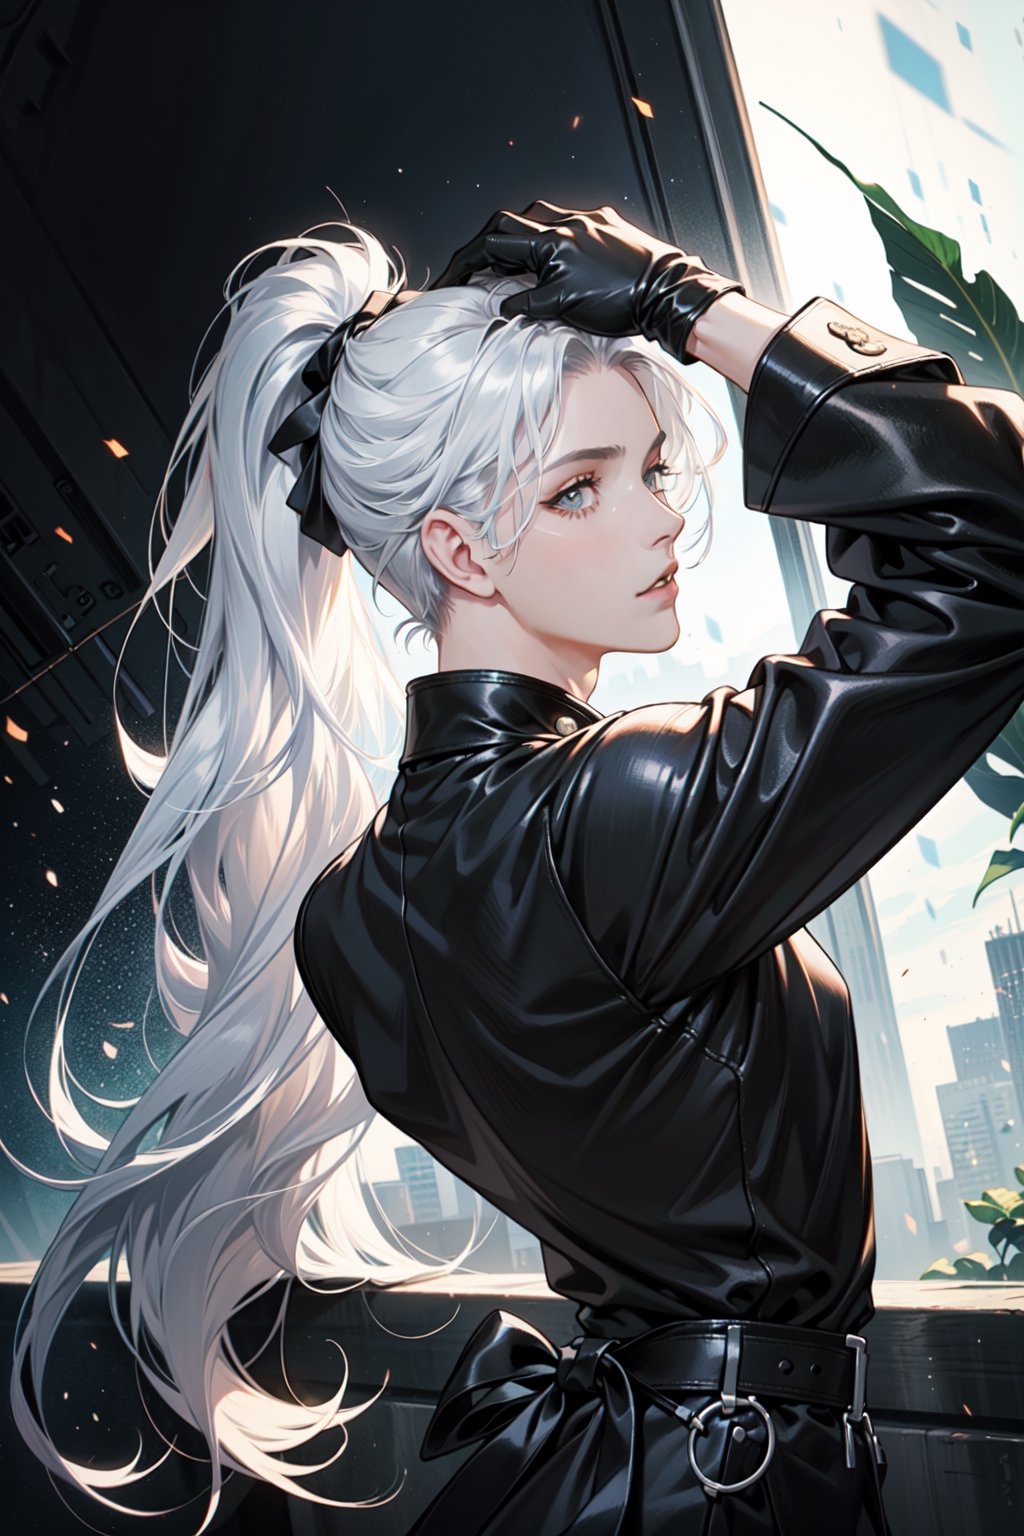 This image shows a person seen from behind. The person has 
he　head turned to the side and he　so long silvery-white hair is tied in a high ponytail. he is staring into the black distance and is wearing a long long-sleeved top and black gloves.

